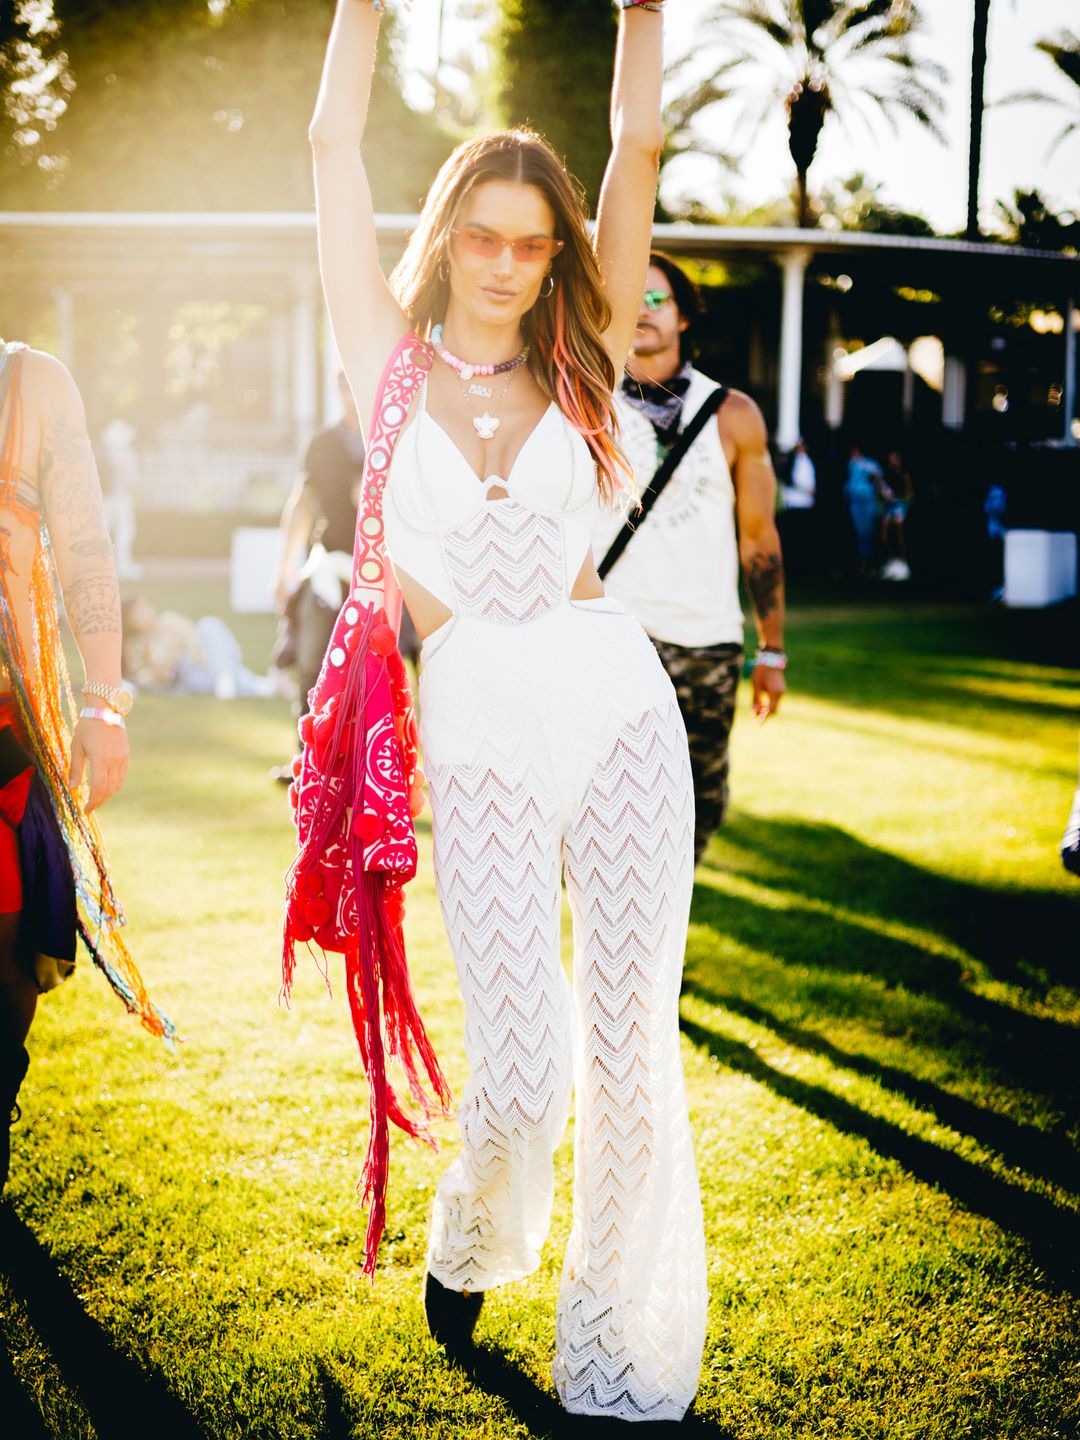 lessandra Ambrosio attends the 2022 Coachella Valley Music and Arts Festival weekend 1